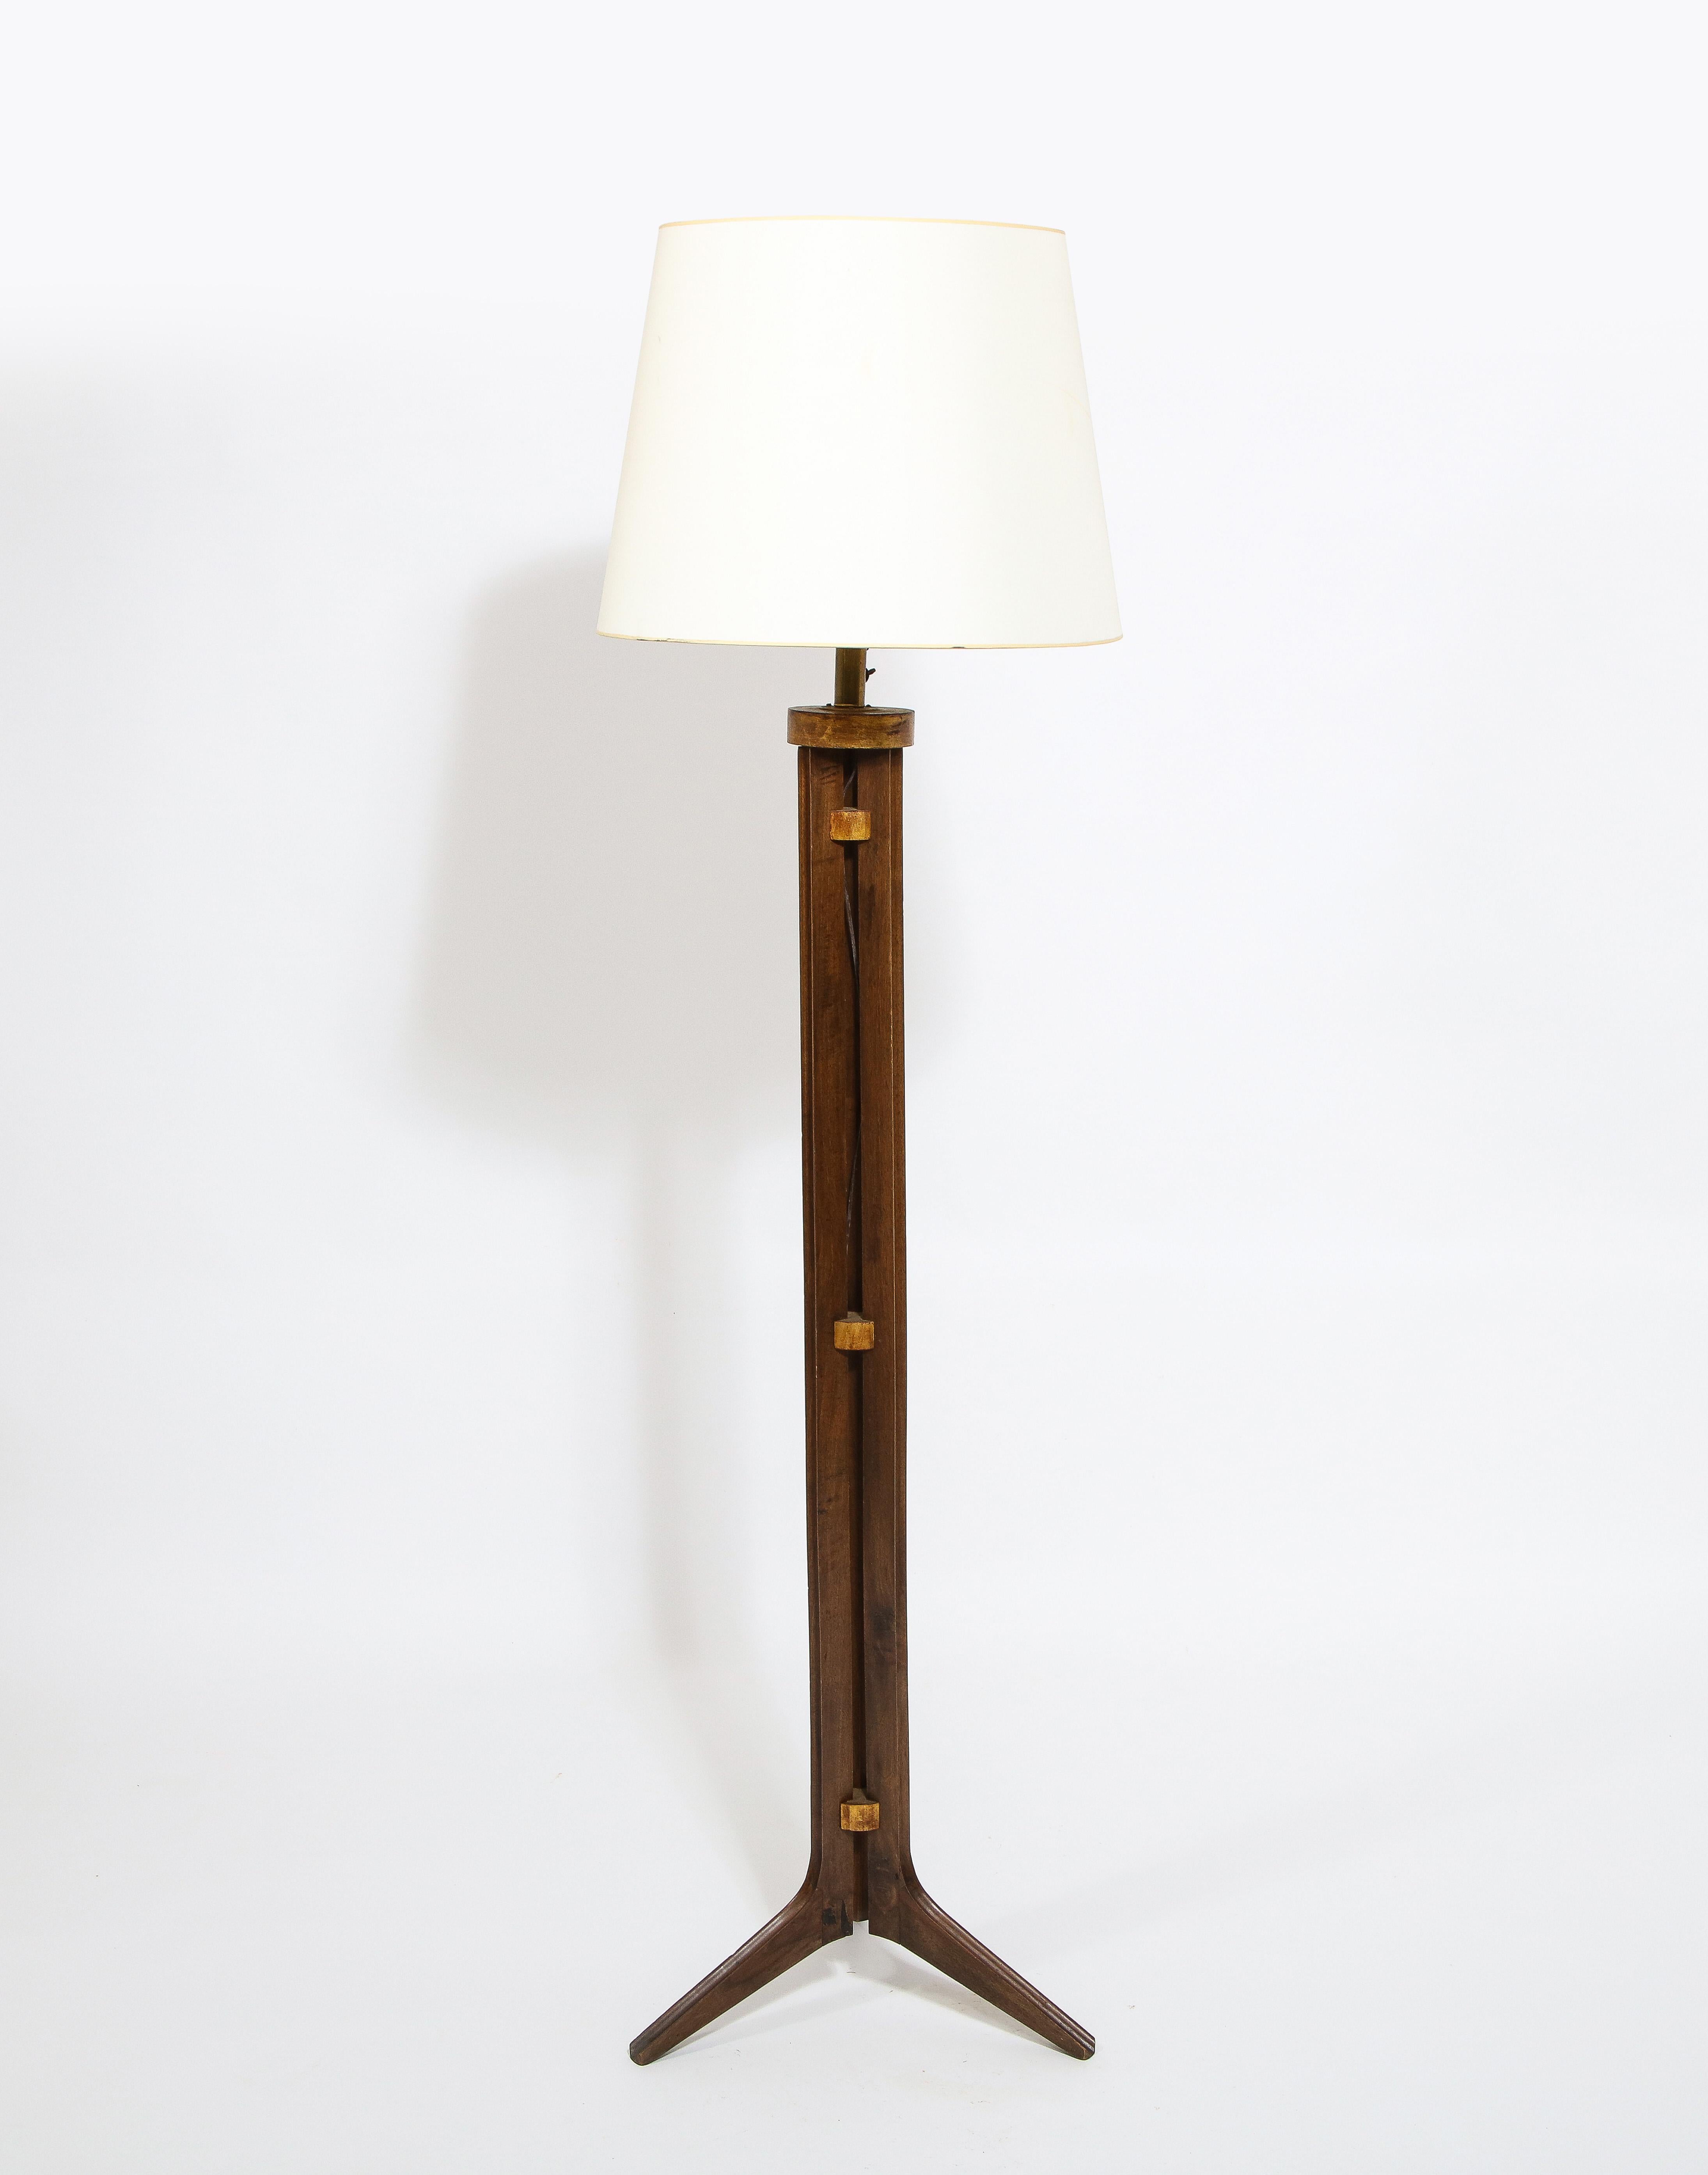 Walnut Tripod Floor Lamp with Gilt Accents, France 1960's  For Sale 4